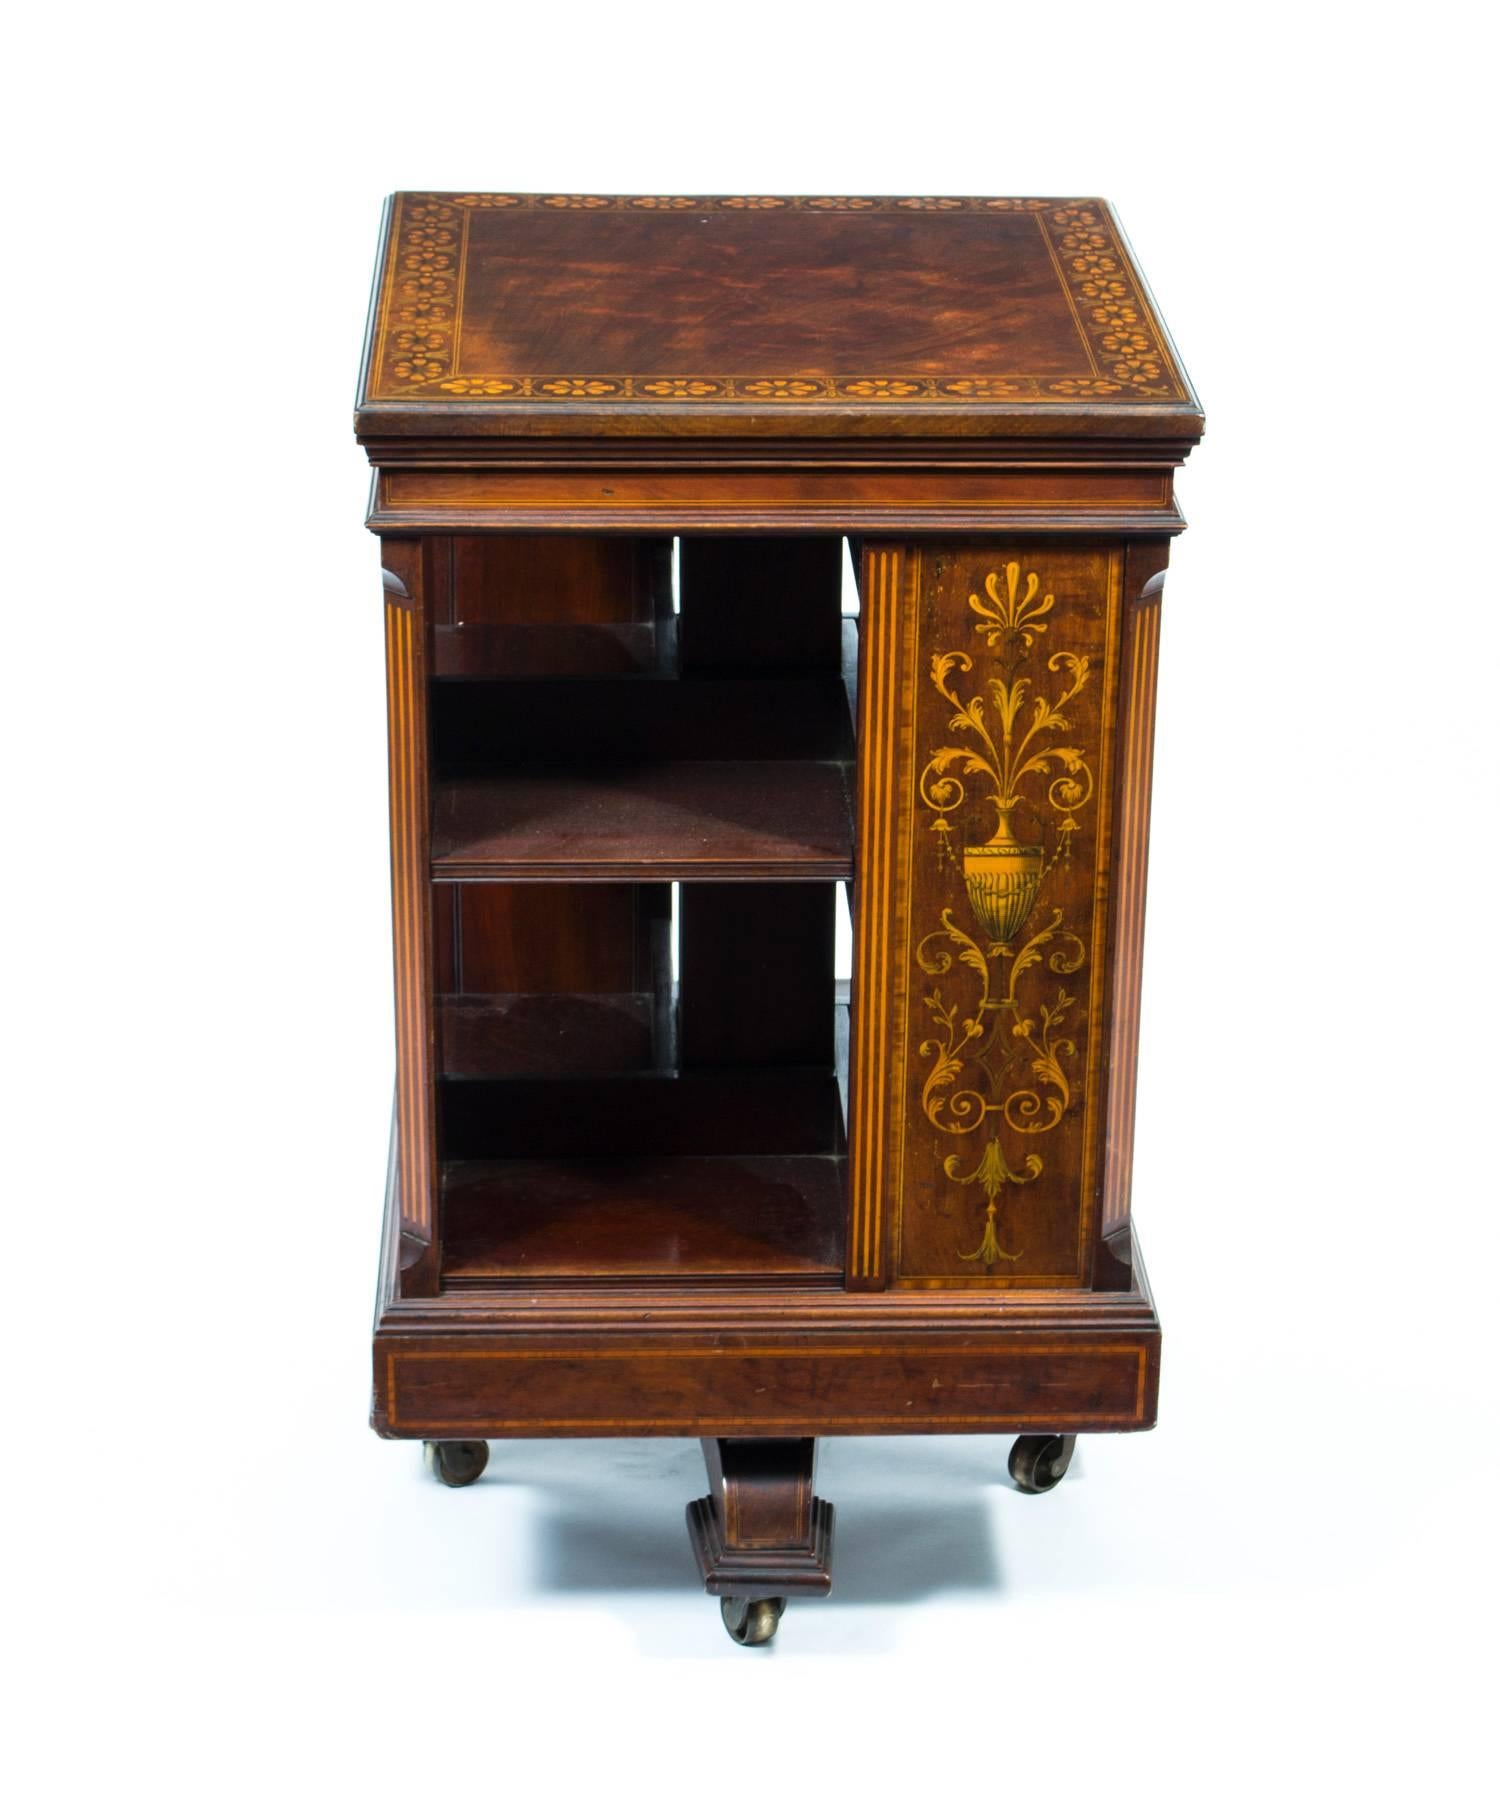 This is an exquisite antique Victorian revolving bookcase, circa 1890.

This lovely piece is attributed to the renowned retailer Maple & Co and is made of flame mahogany with an exquisite satinwood, boxwood and ebony marquetry and cross